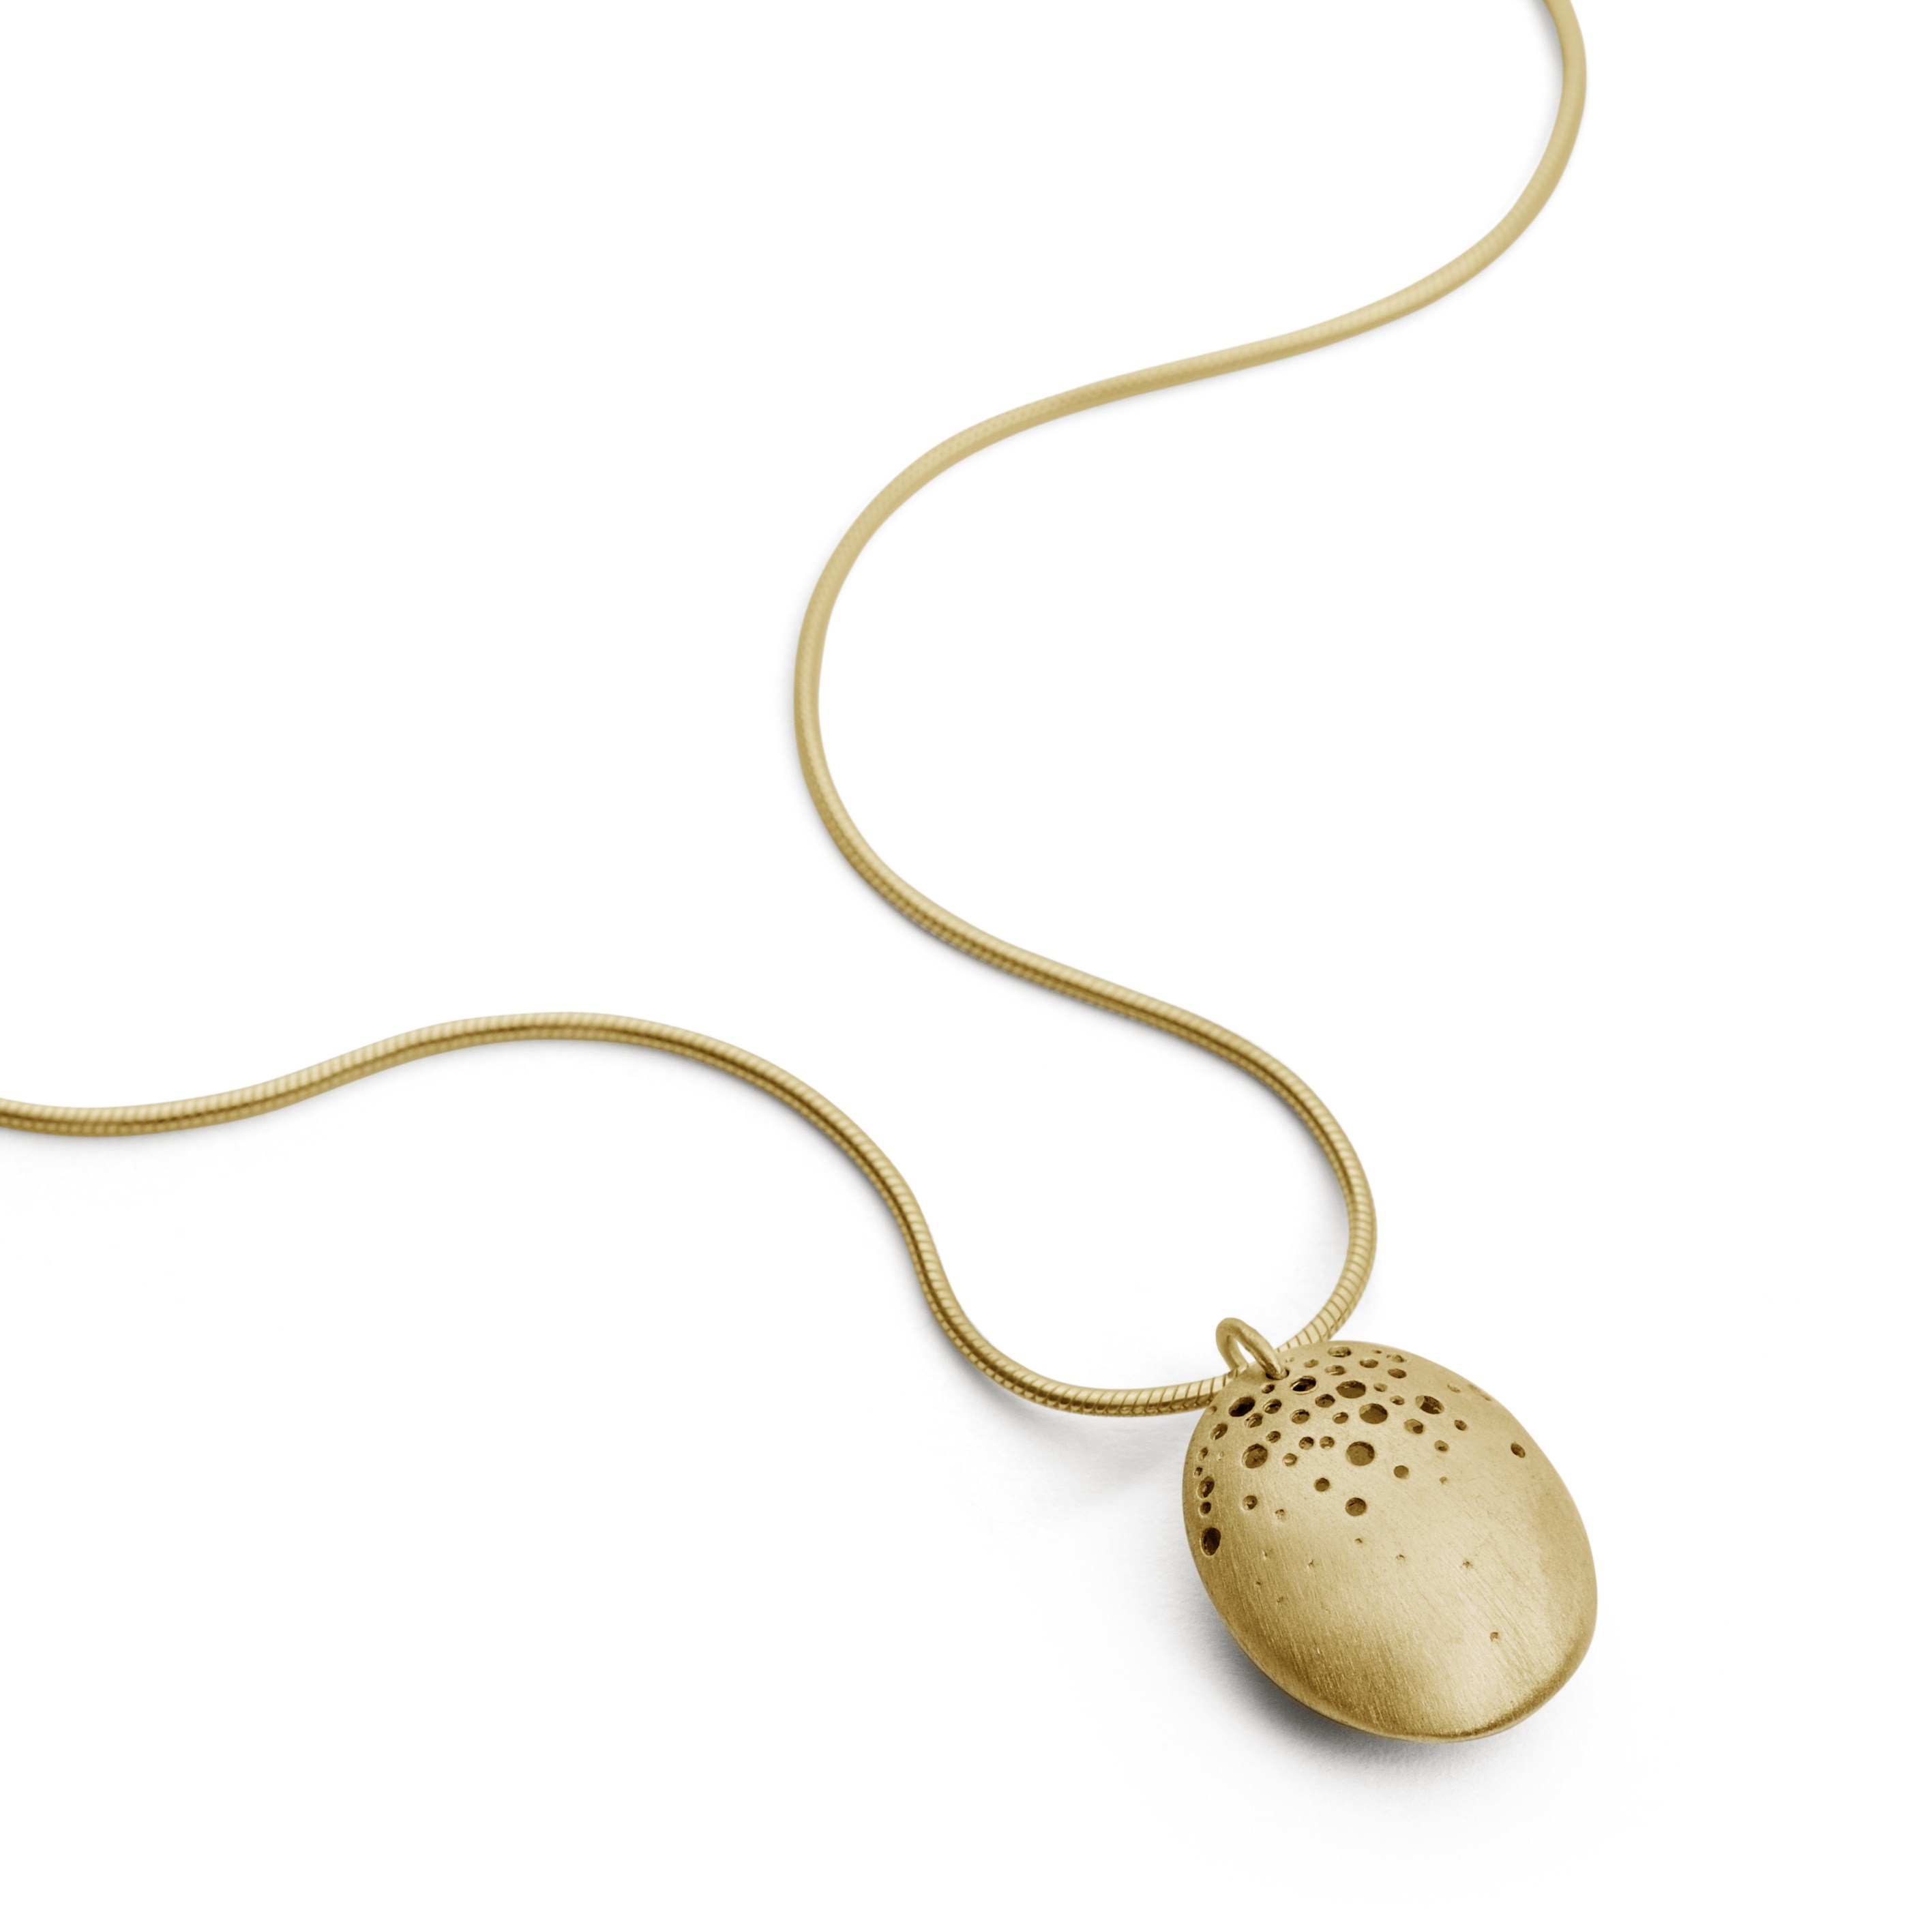 Hollow domed gold pendant  Necklaces / Pendants by Kate Smith